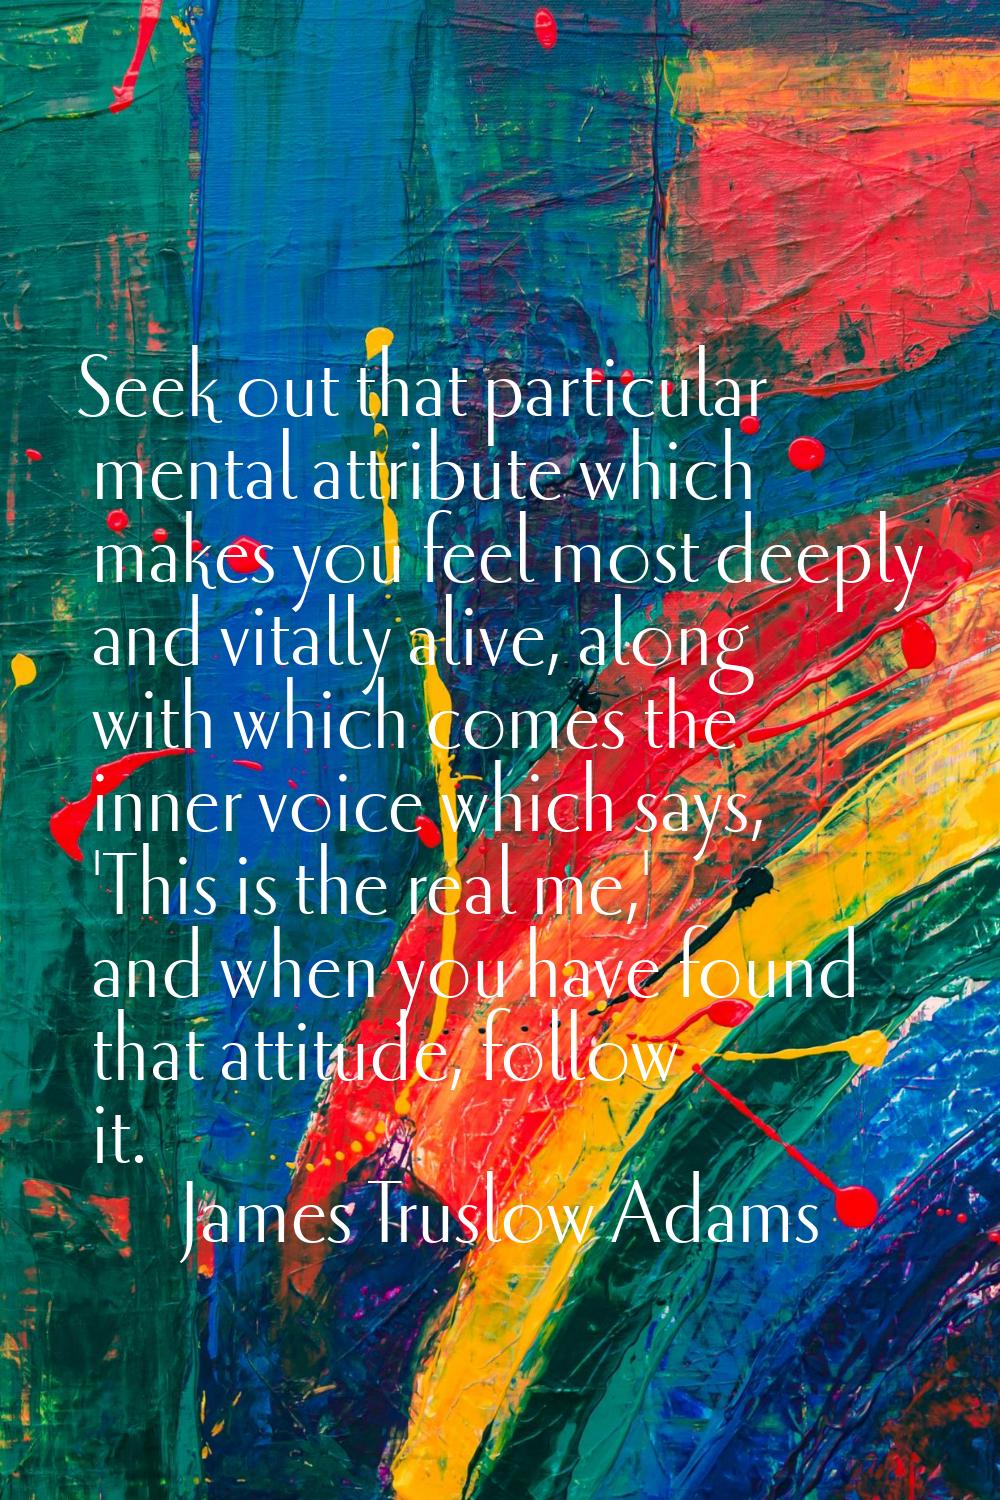 Seek out that particular mental attribute which makes you feel most deeply and vitally alive, along